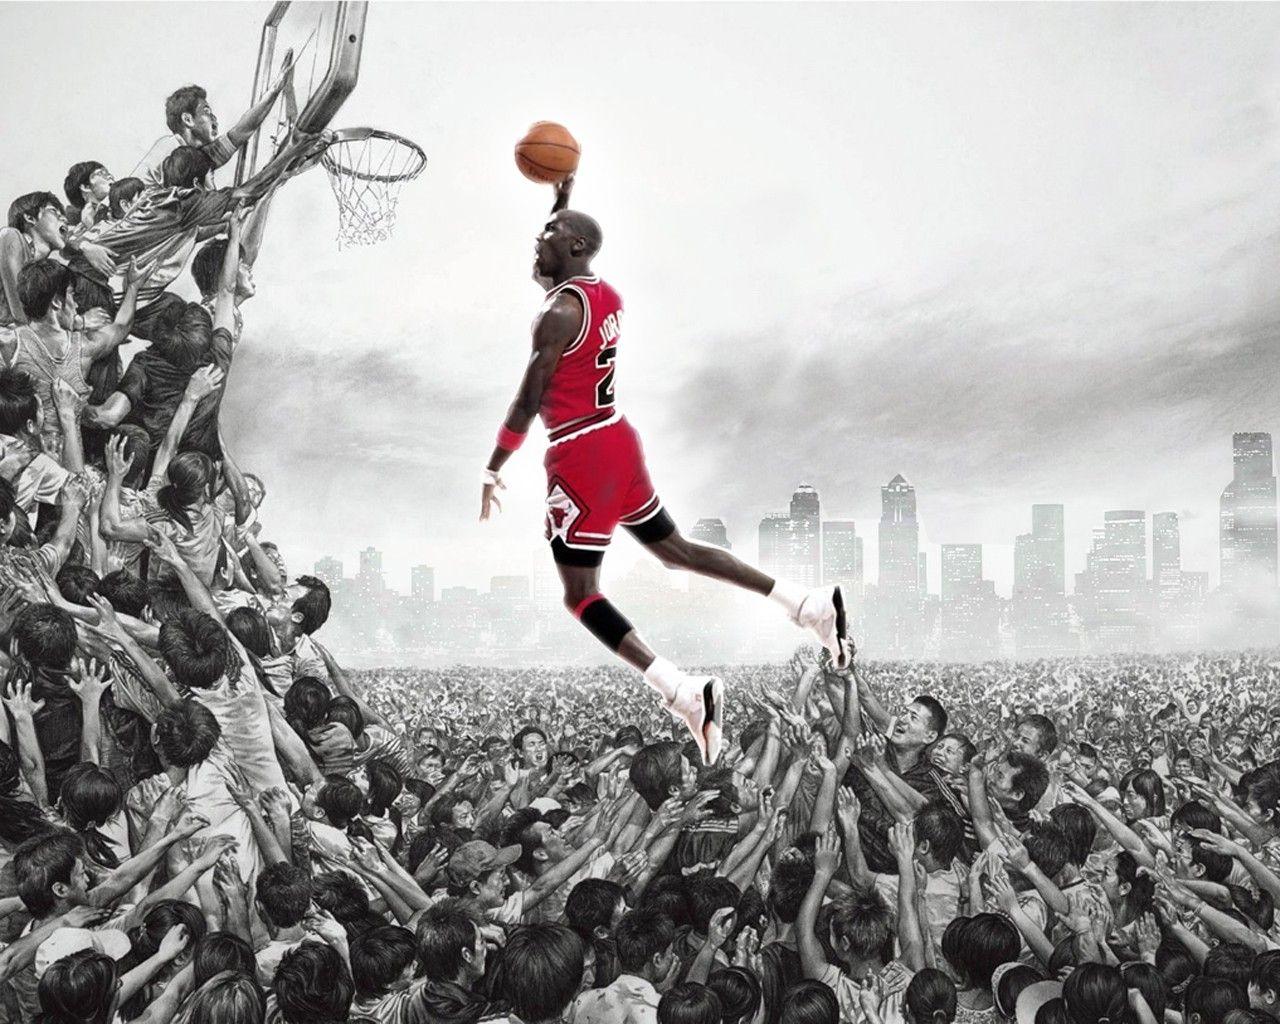 Download Cool Basketball Wallpaper NBA Gallery 1600×1200 Awesome